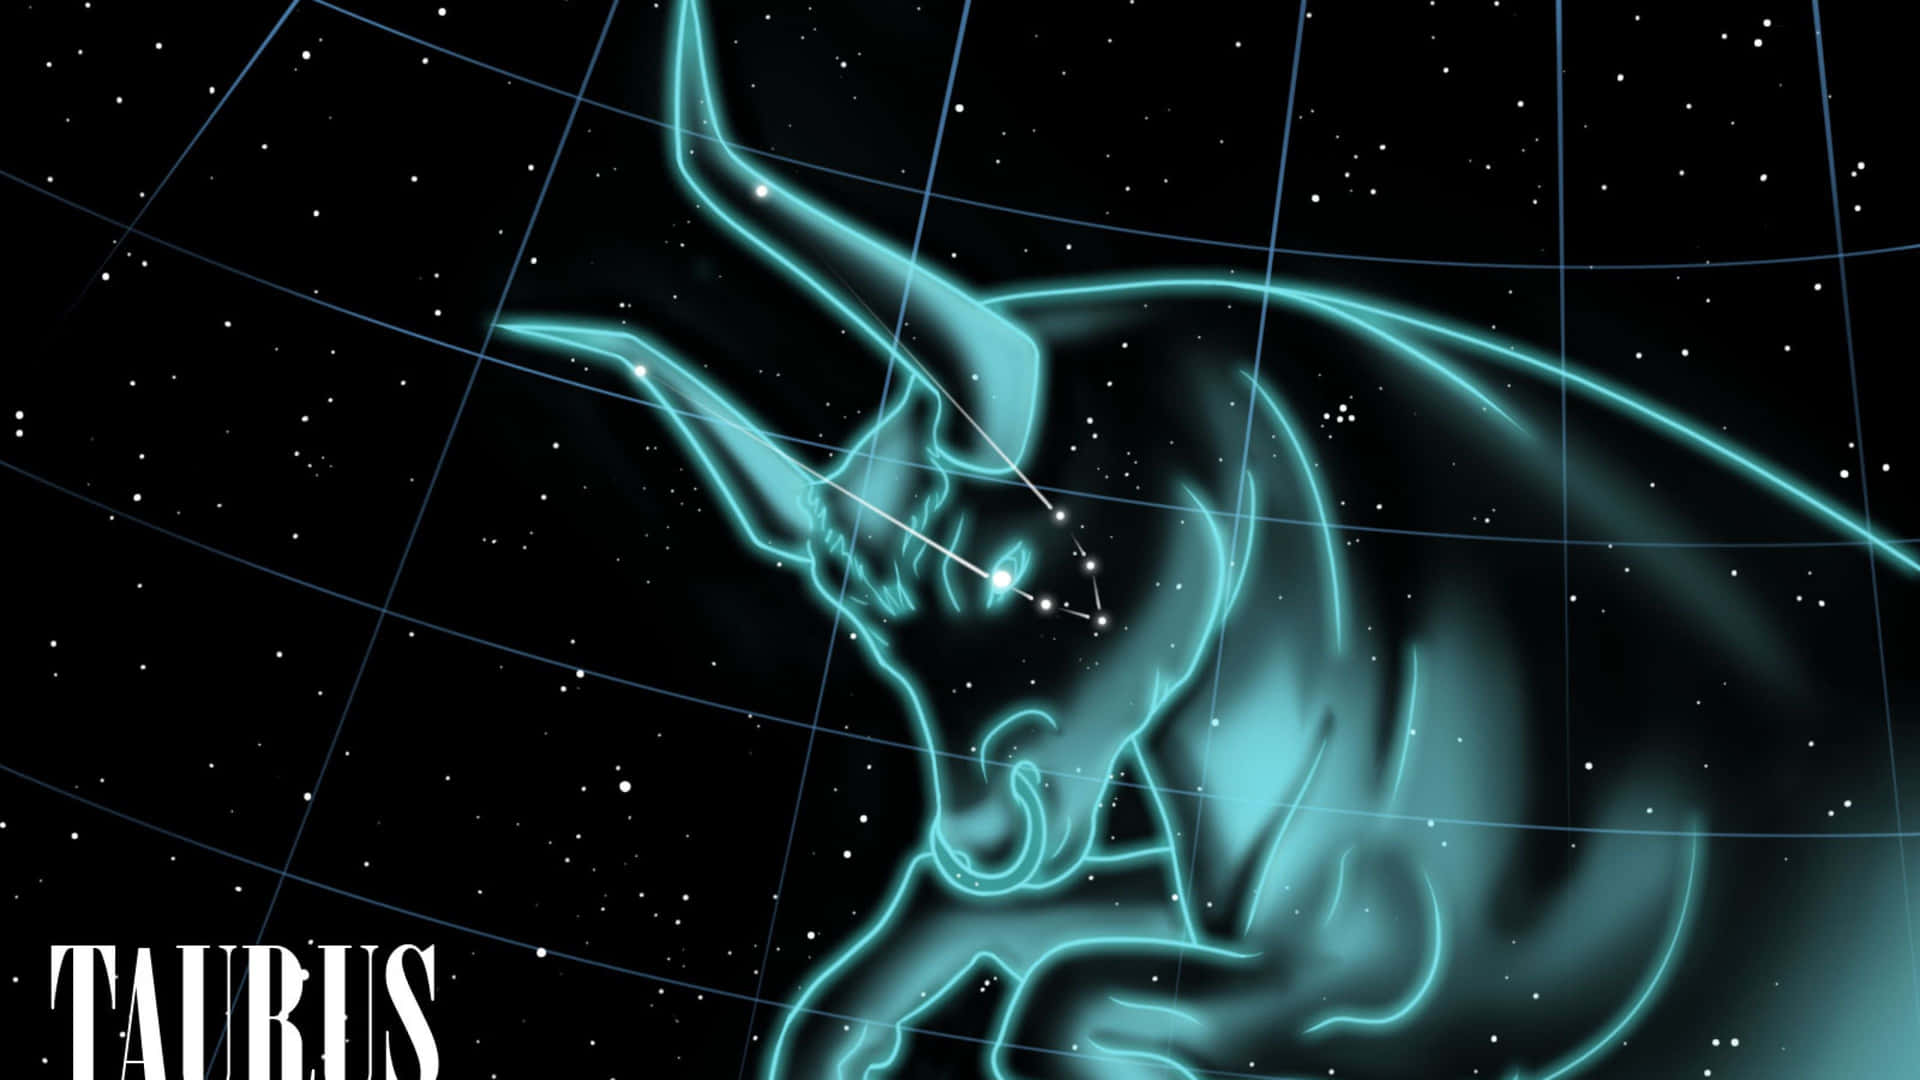 A Colorful Taurus Constellation in the Universe